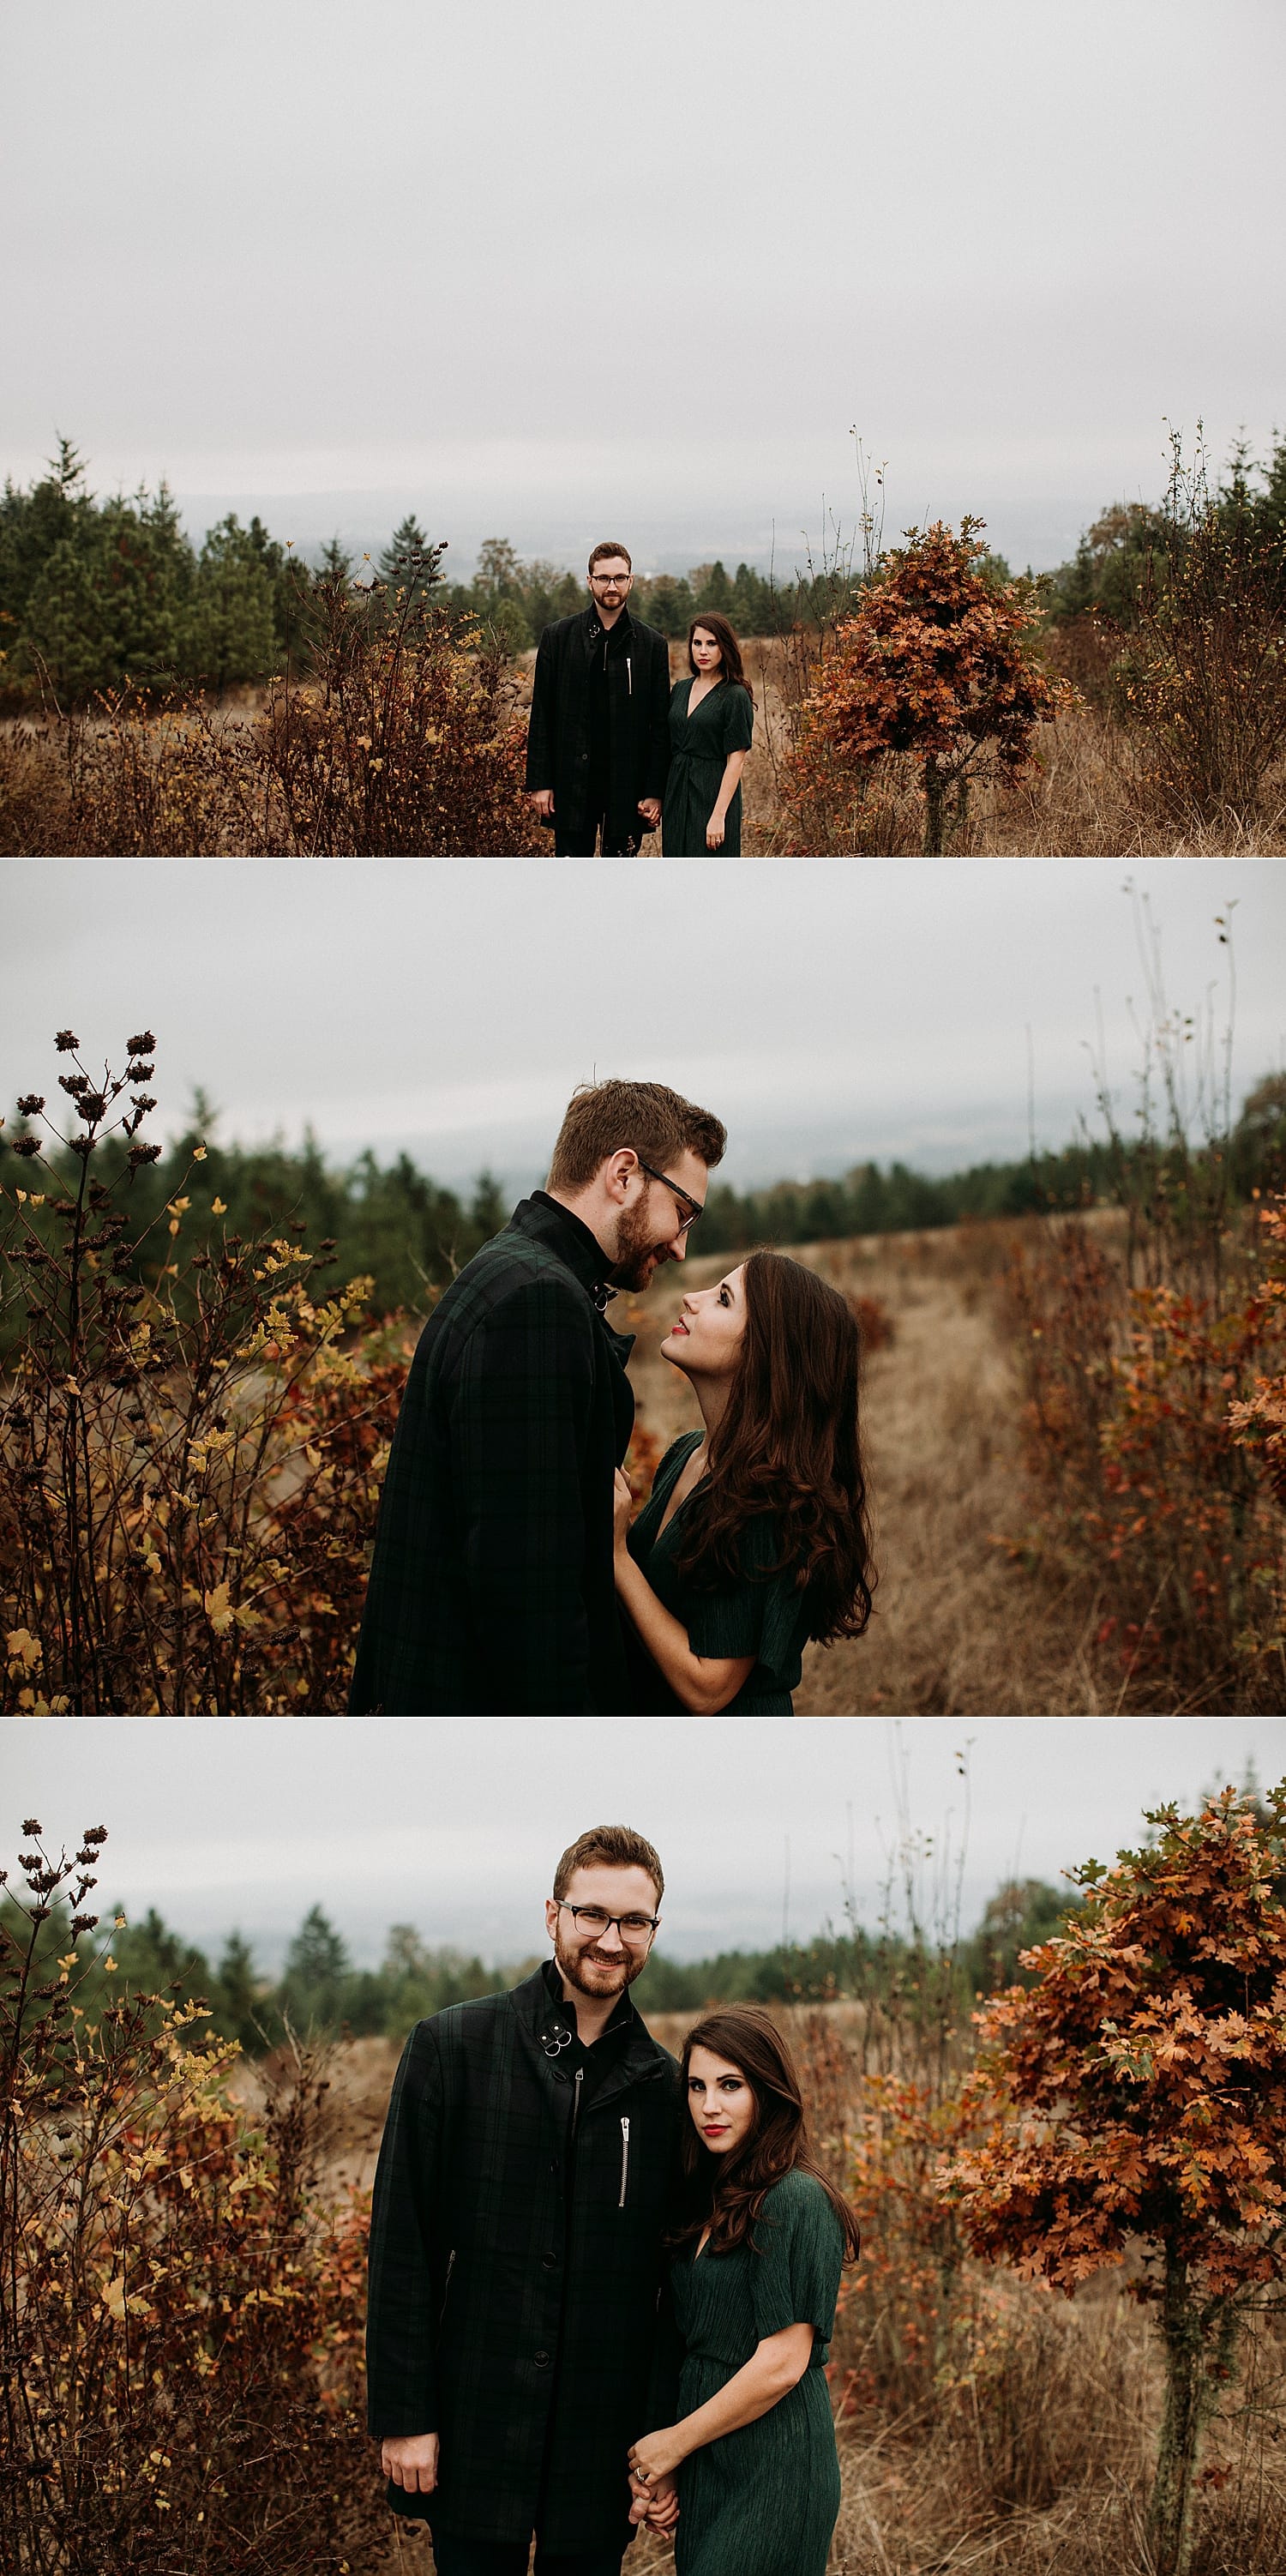 american gothic inspired pose with a view Cooper Mountain Engagement session by Portland engagement photographer Marcela Pulido